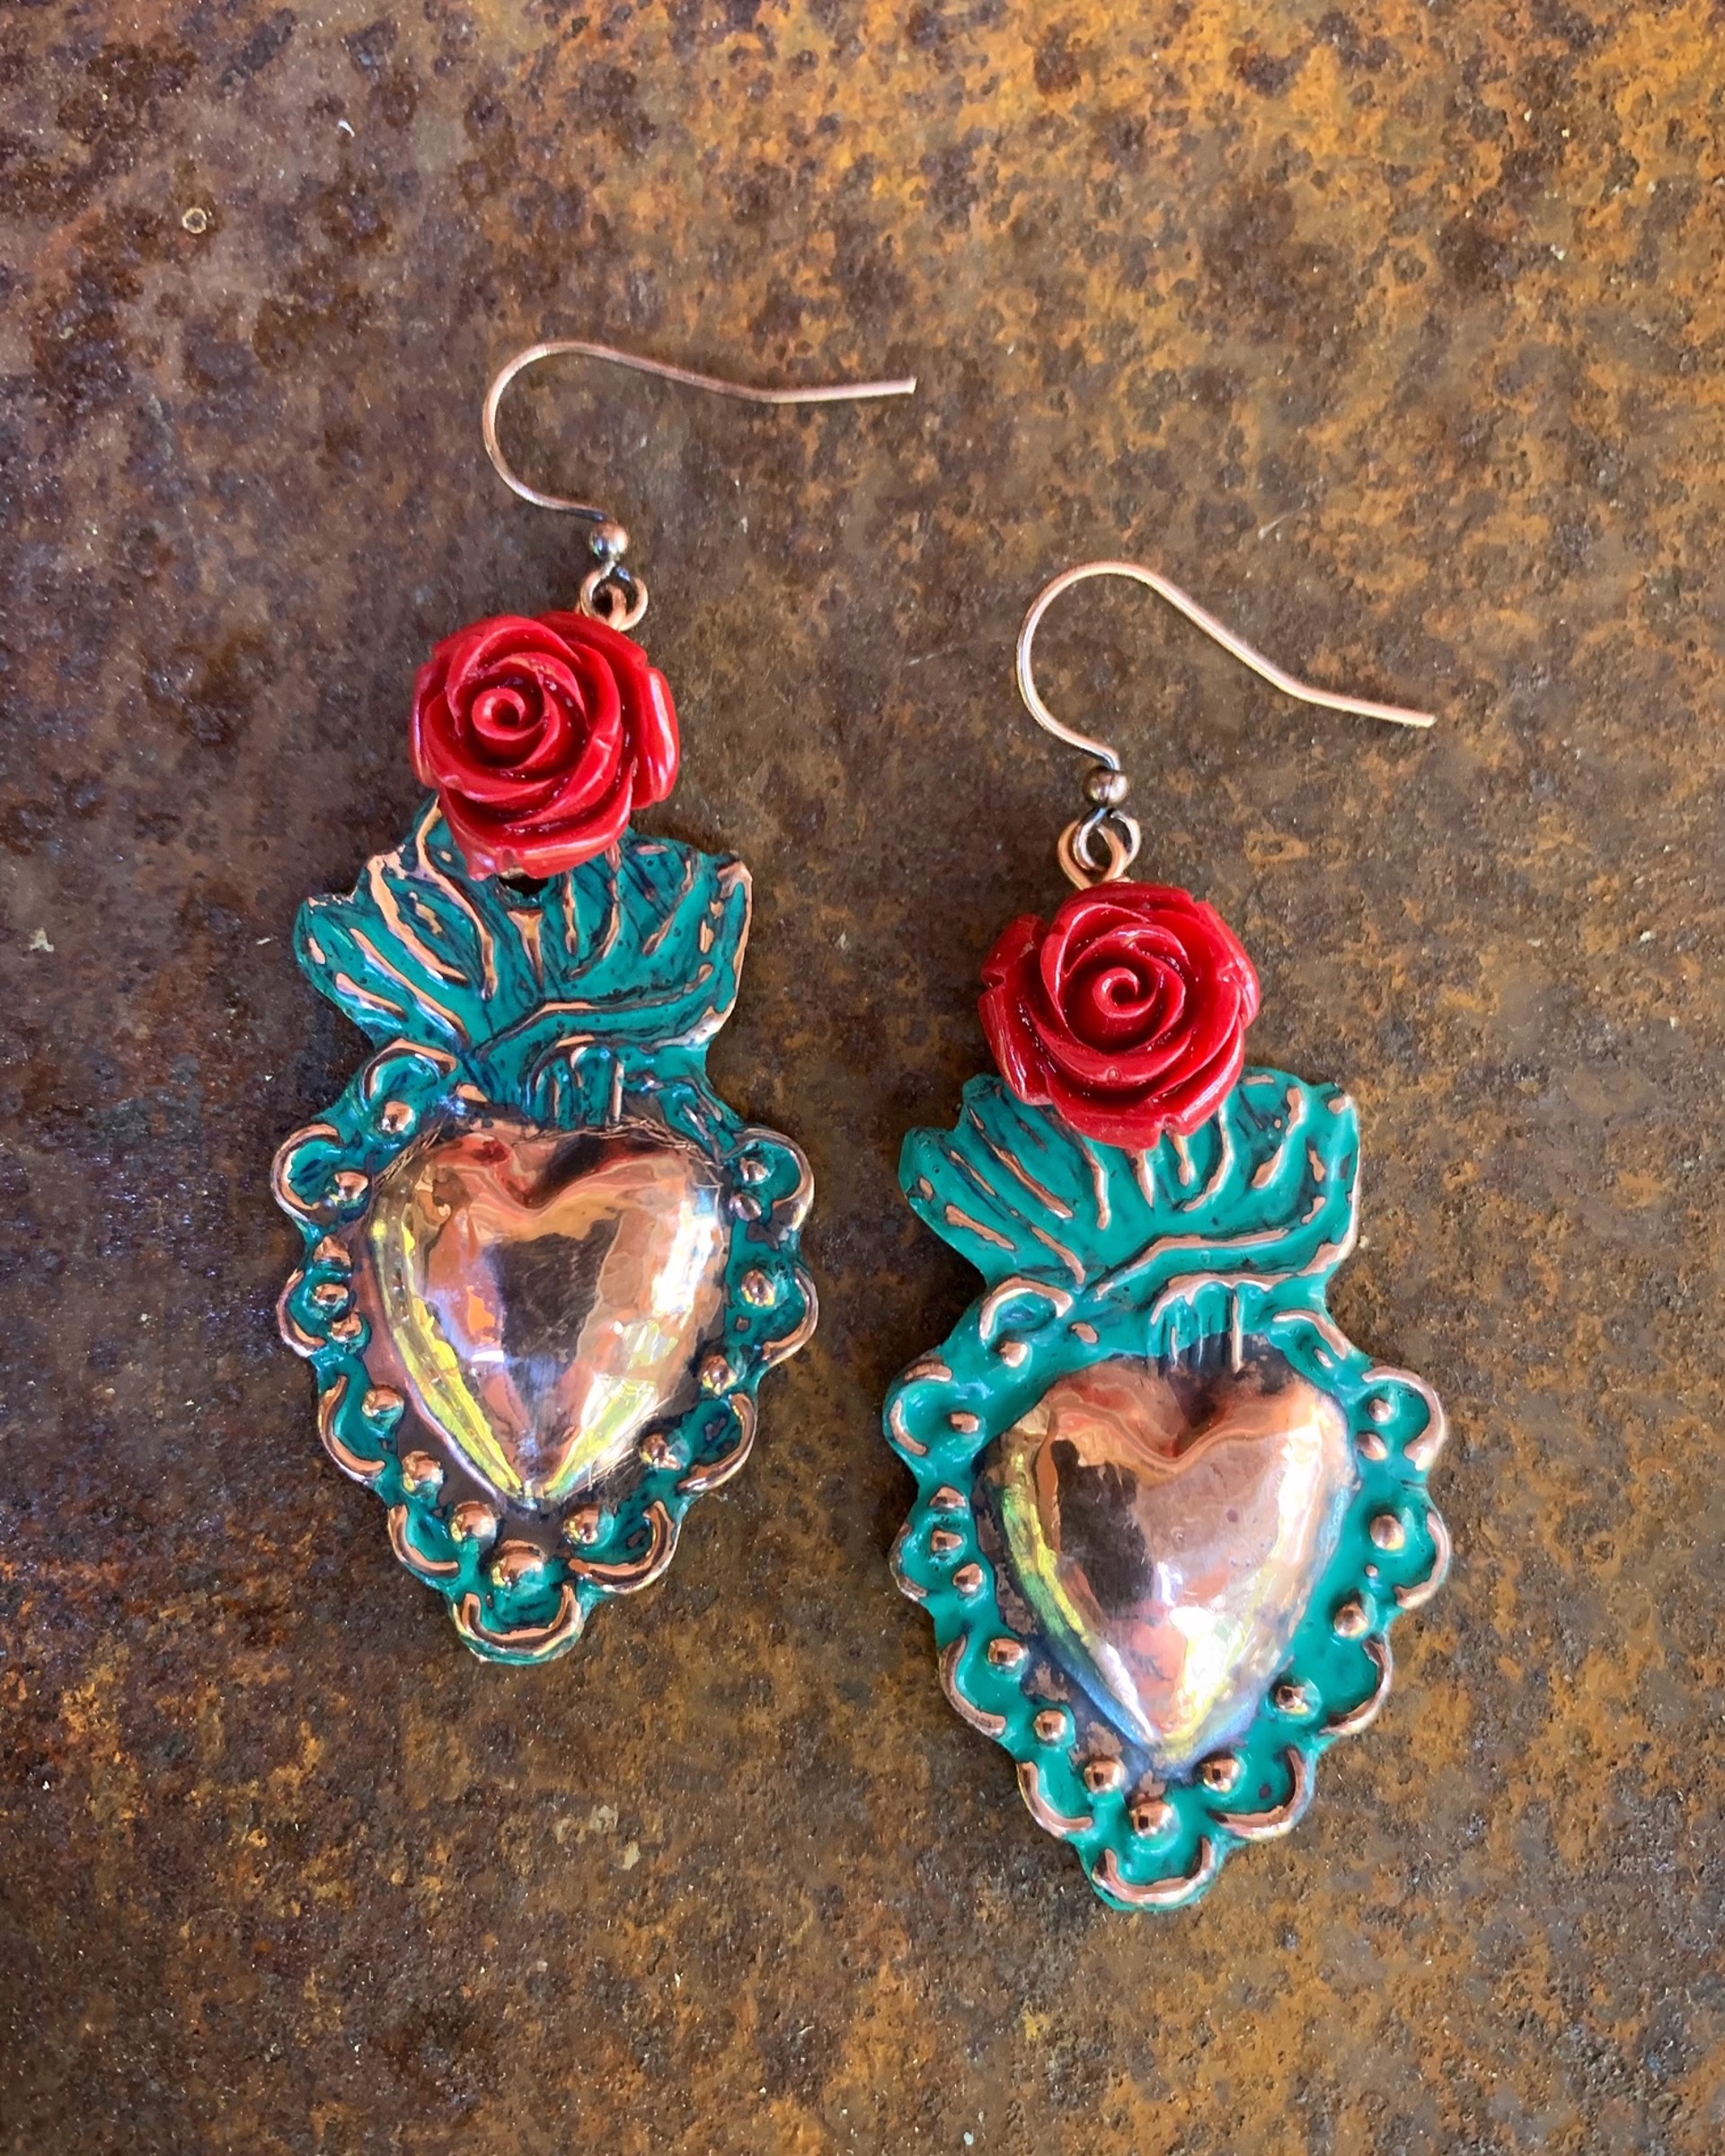 K854 Sacred Heart Earrings with Red Roses by Kelly Ormsby